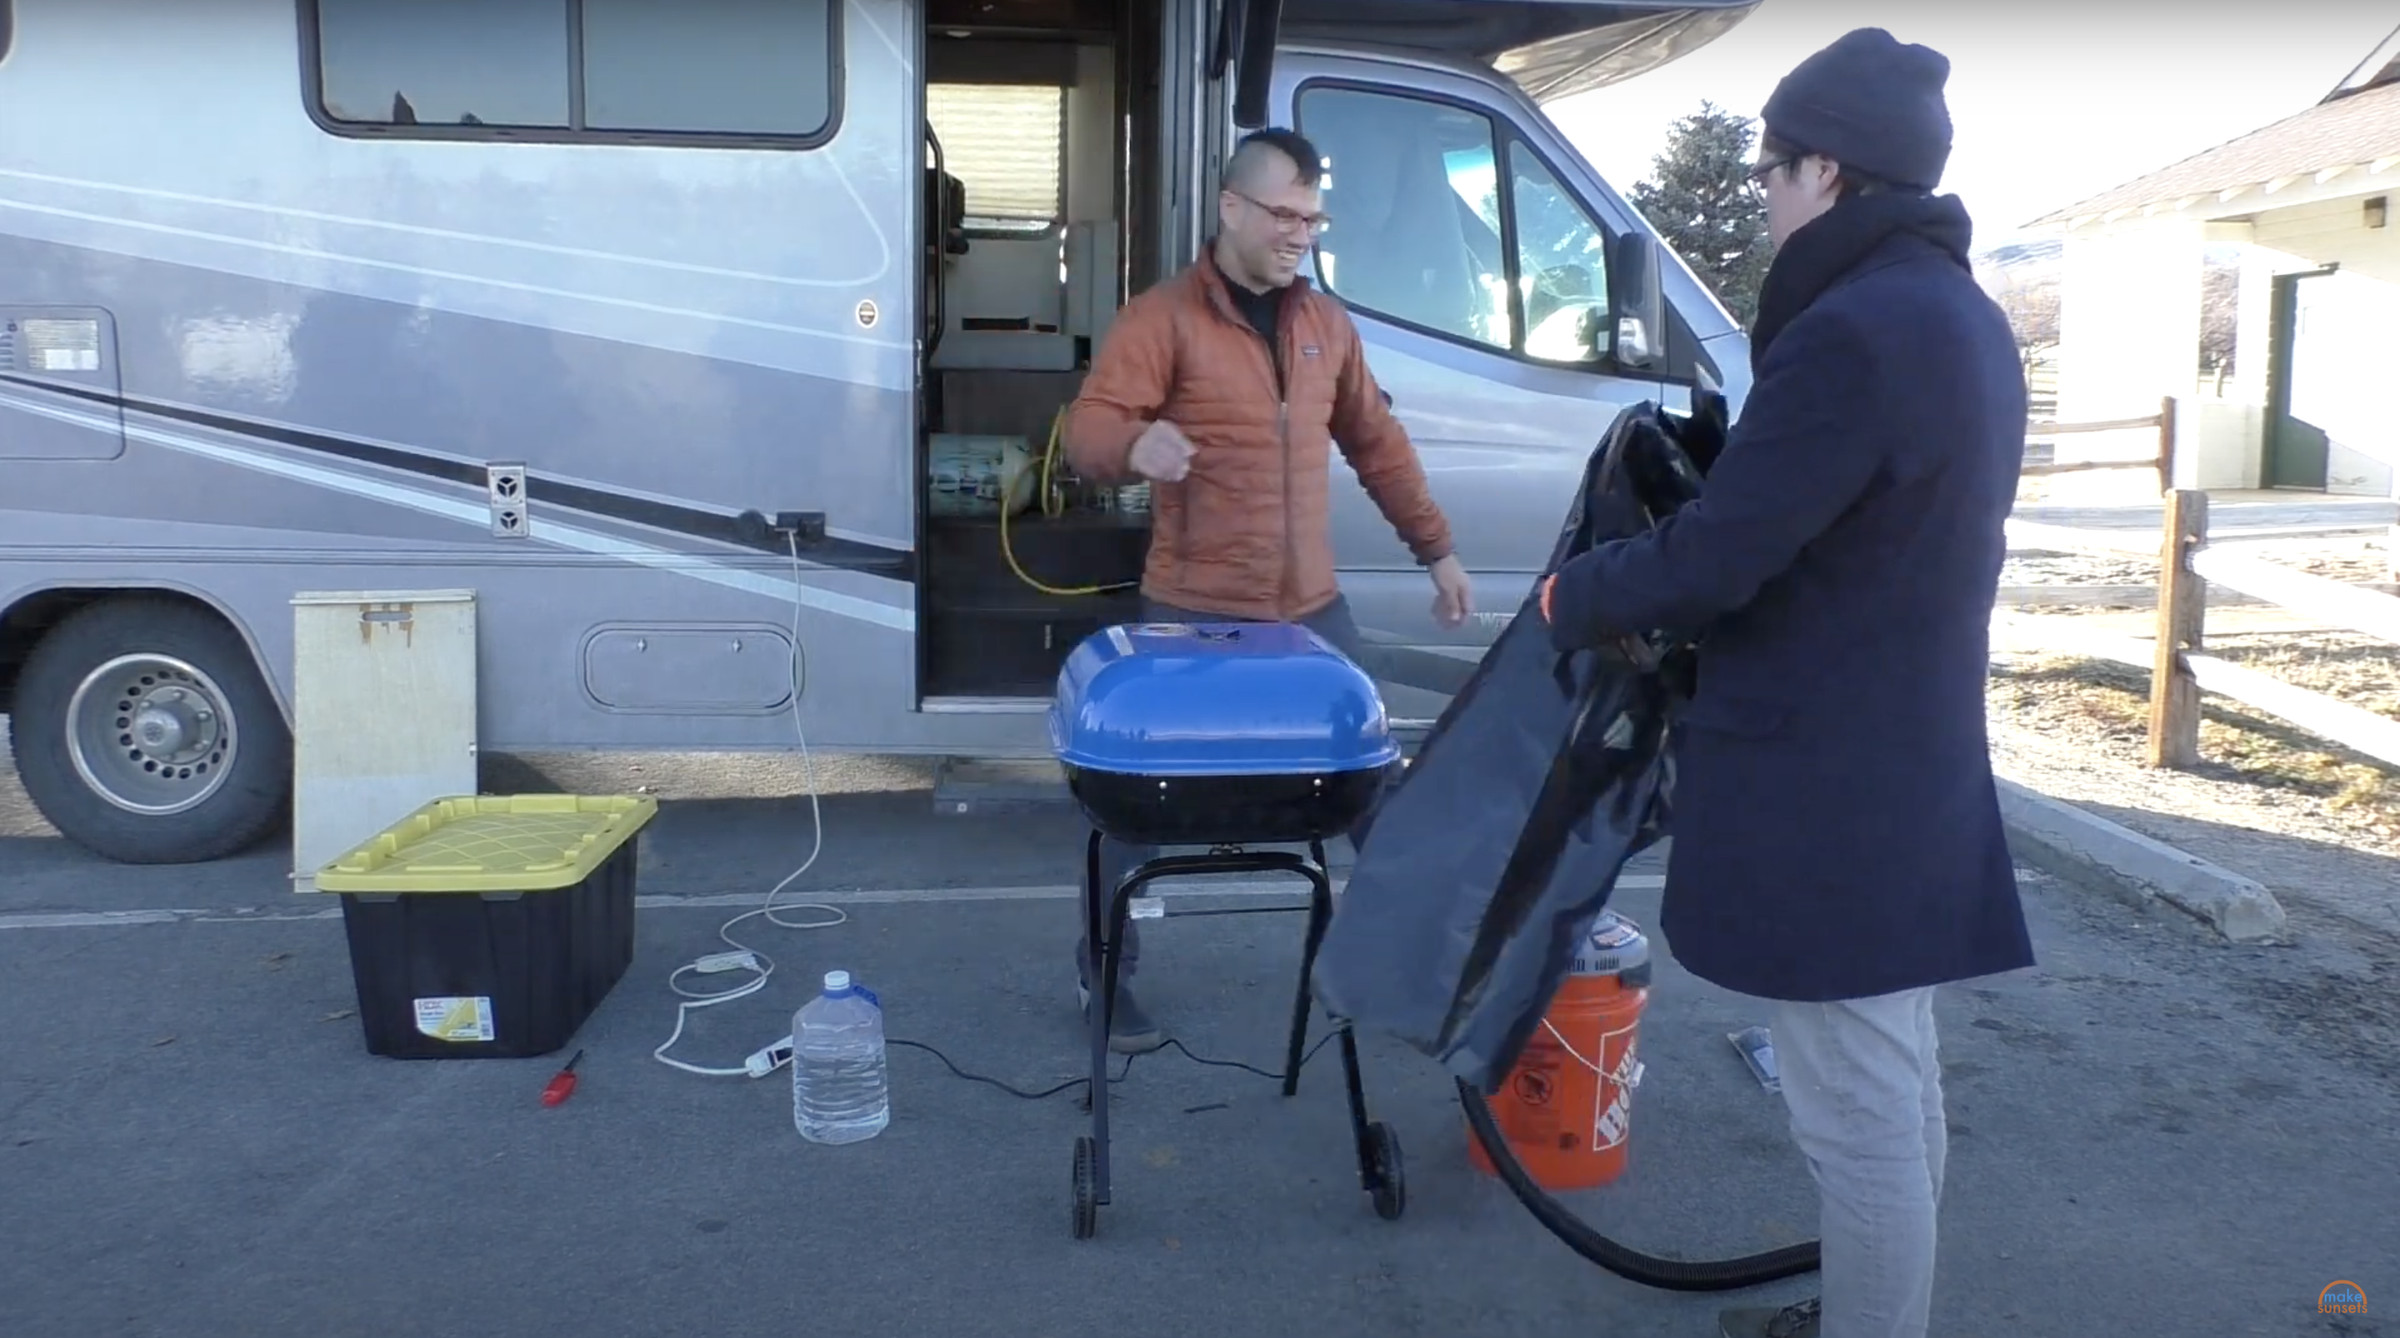 Two men stand in a parking lot with a small blue charcoal grill between them.